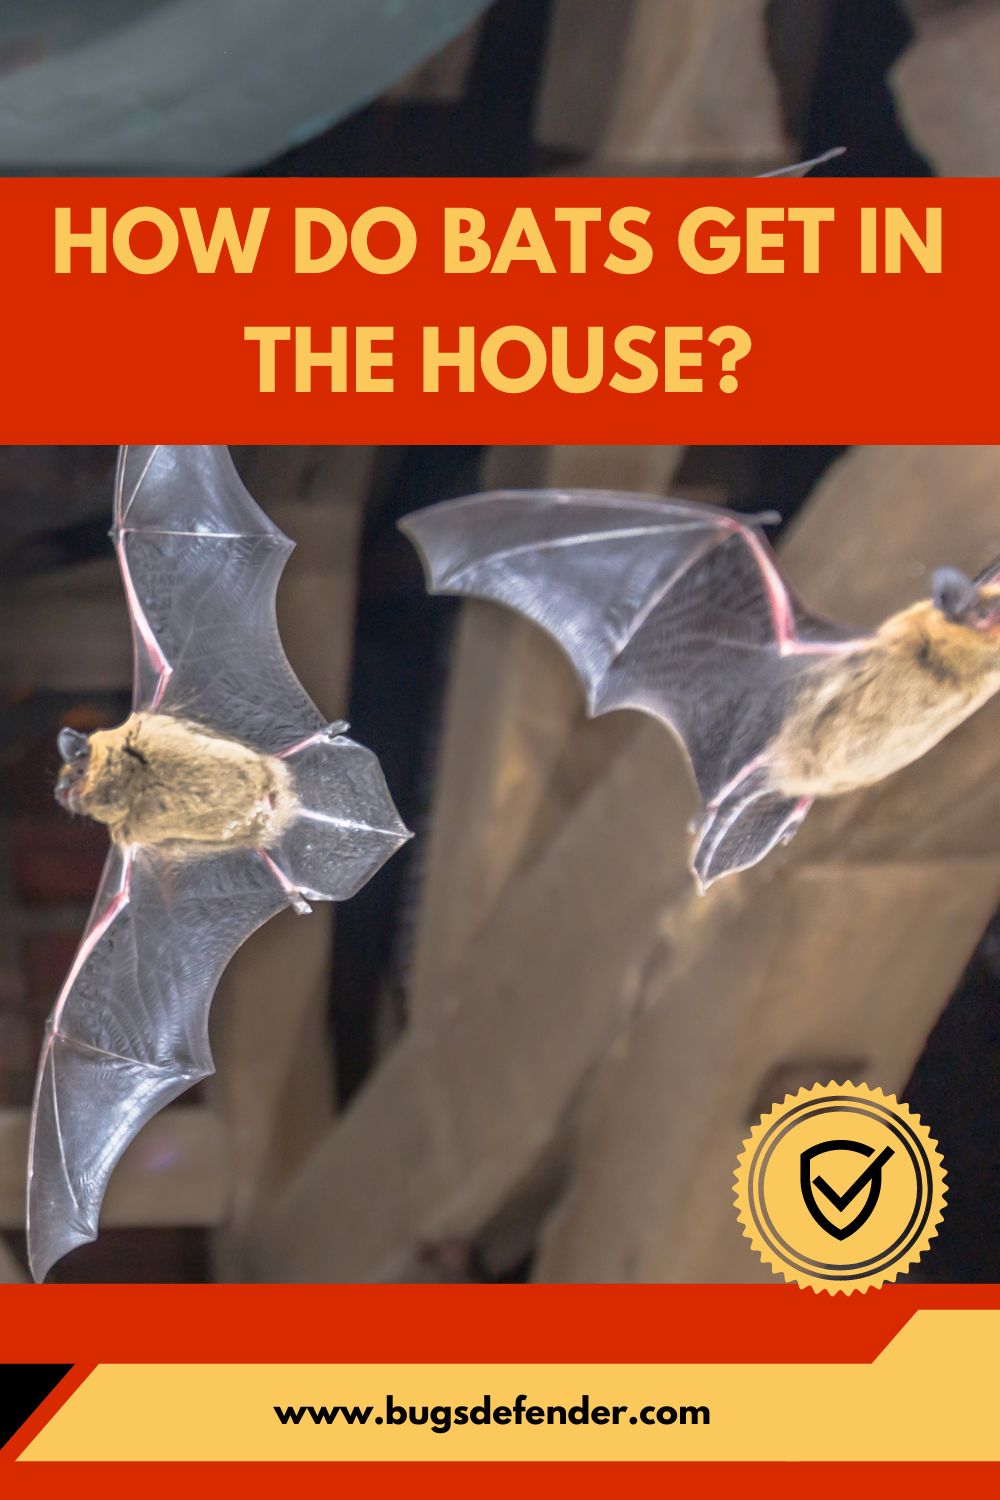 How Do Bats Get in the House? pin2